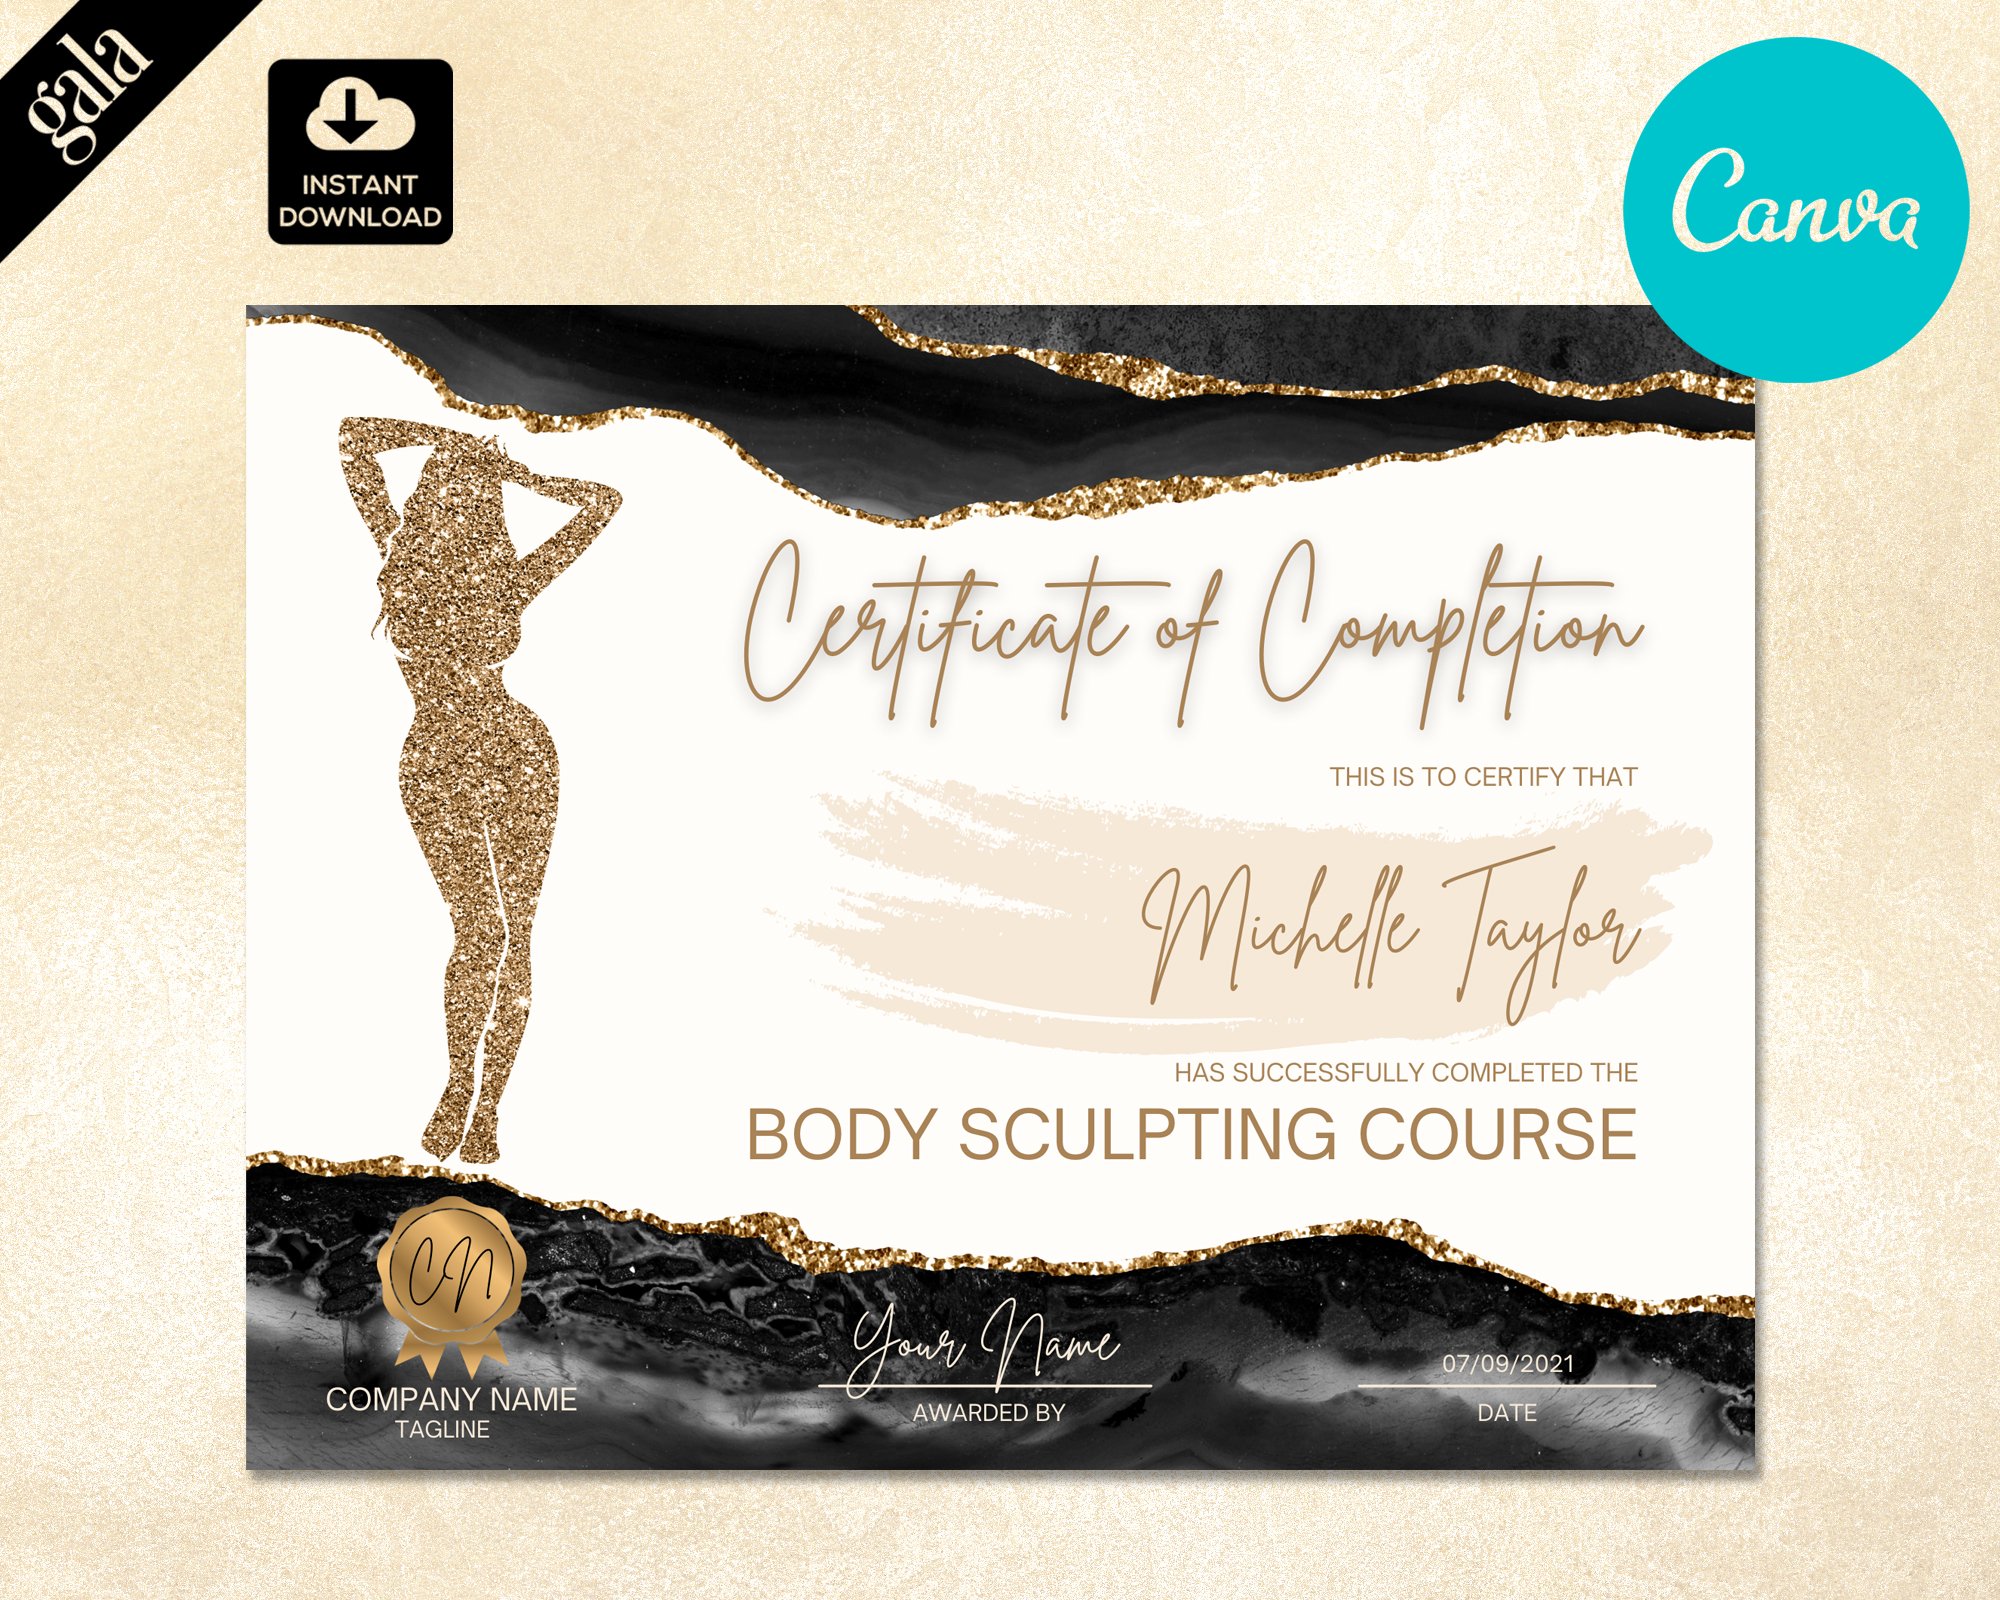 Certificate of Completion Template cover image.